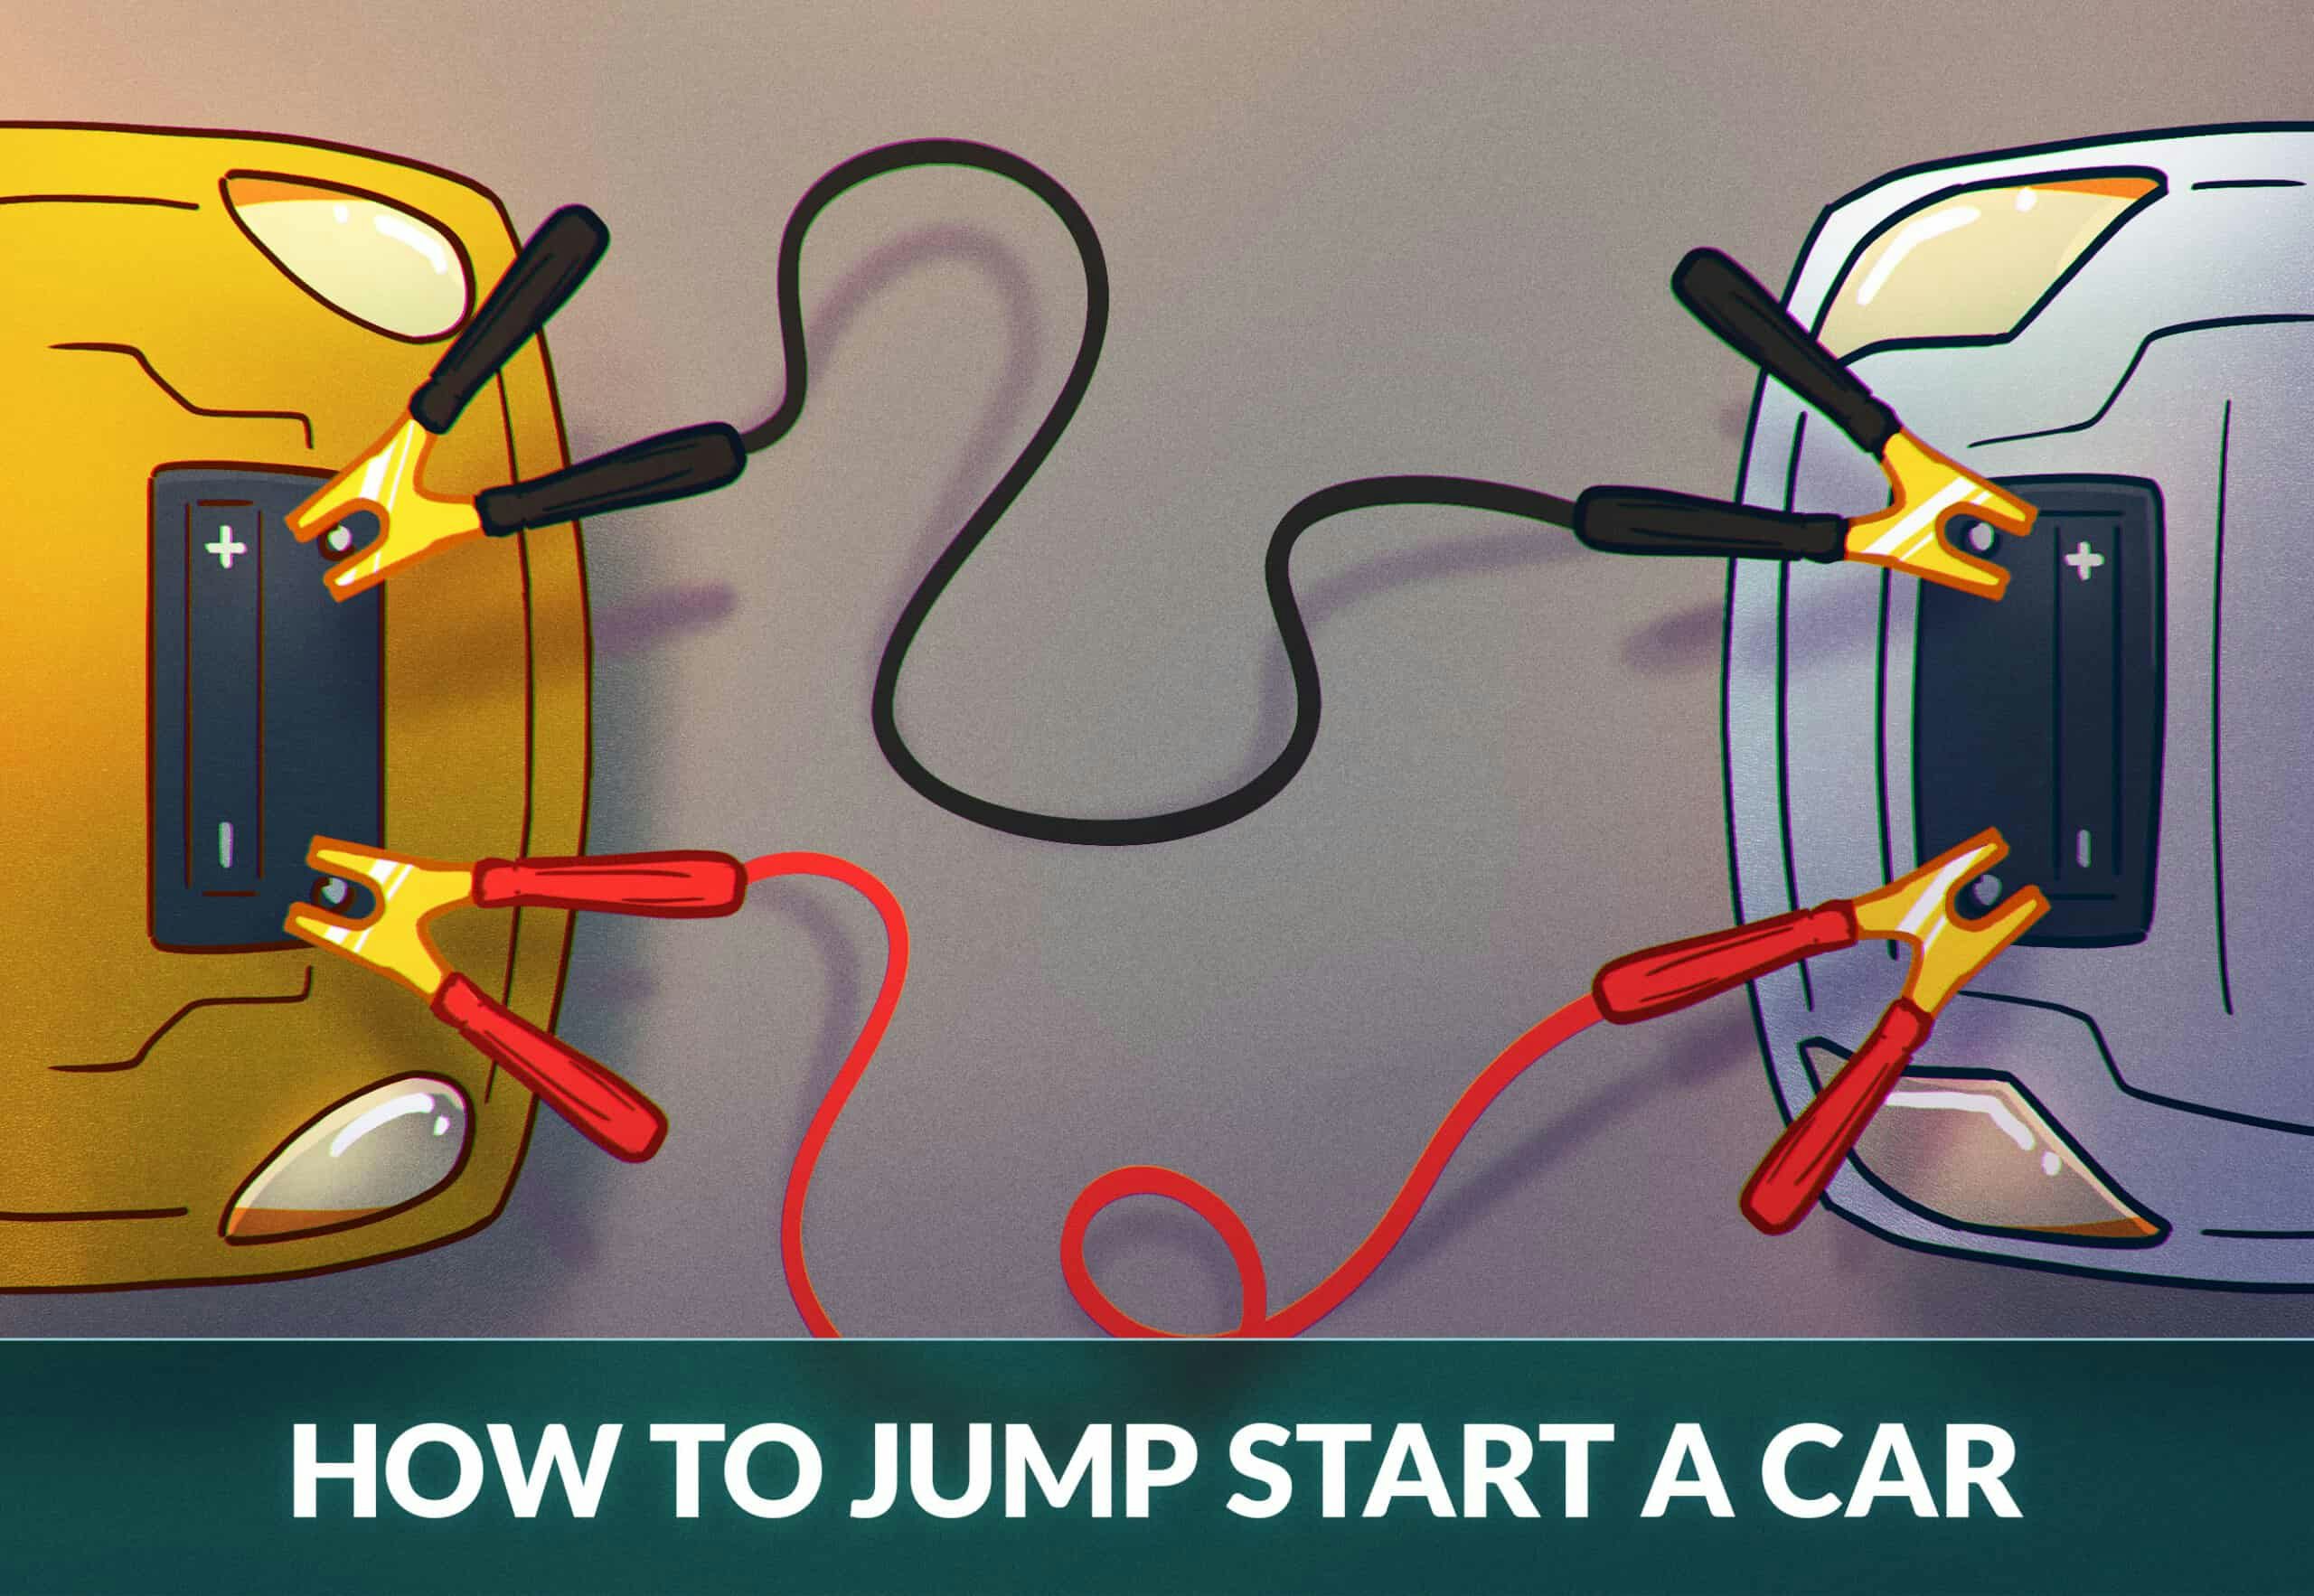 3 Ways to Jump Start a Car - wikiHow